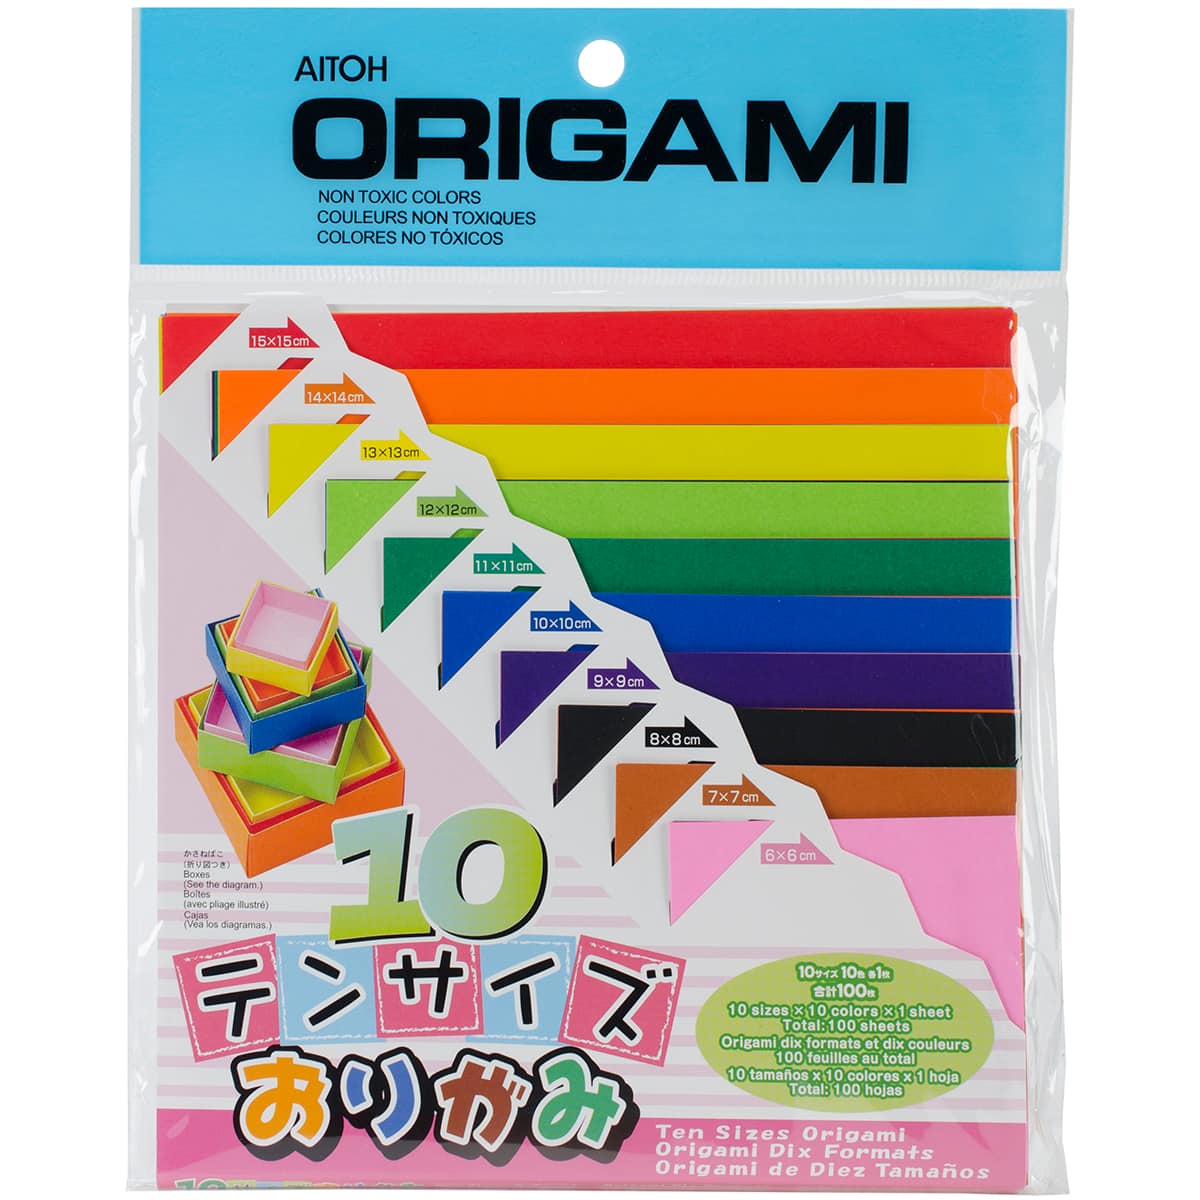 9.75-Inch by 9.75-Inch 100-Pack Aitoh OG-6 Origami Paper